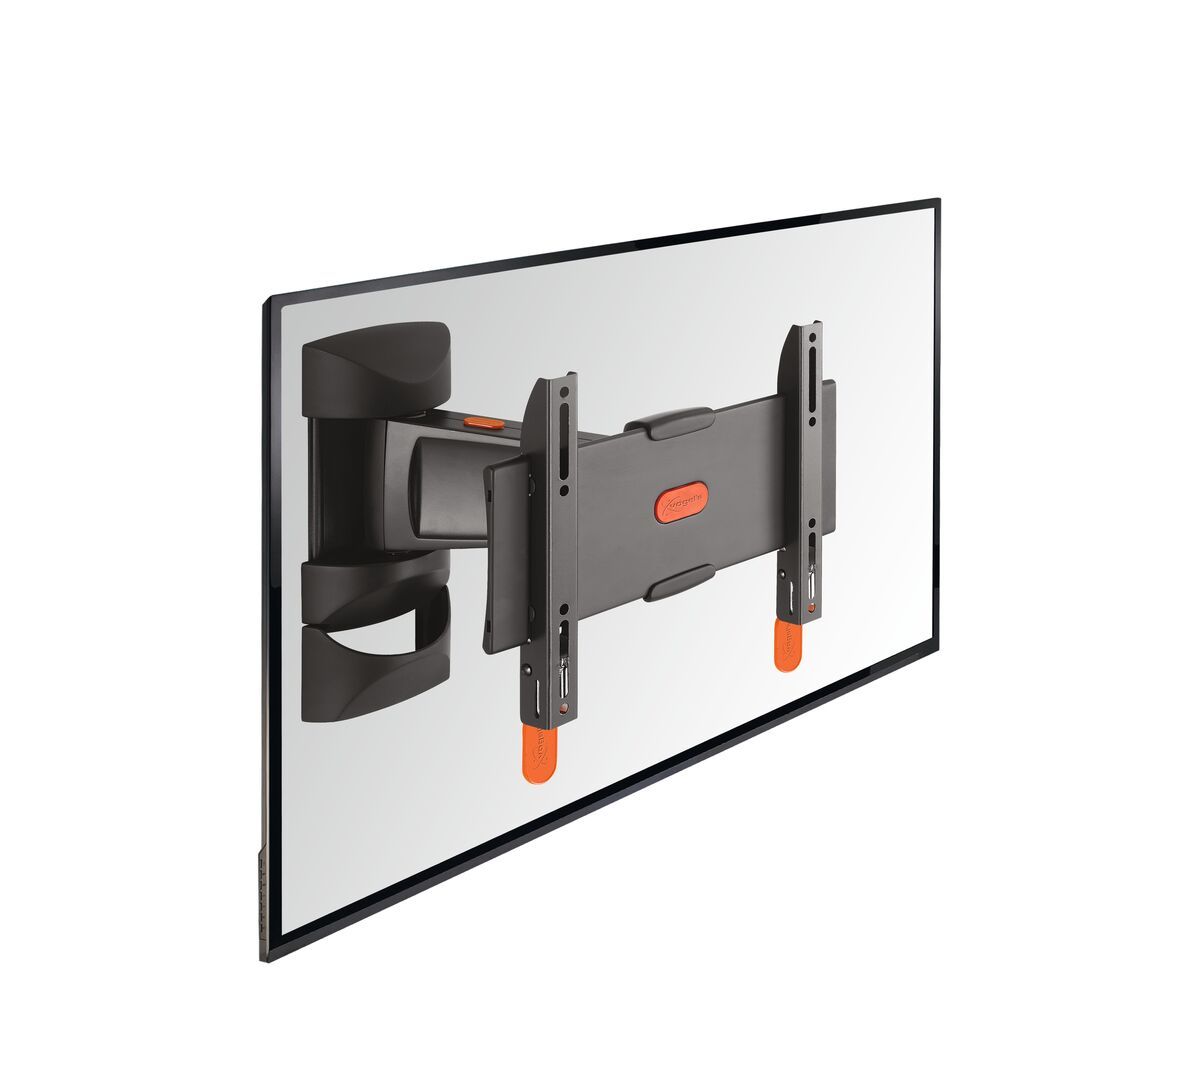 Vogel's BASE 25 S Full-Motion TV Wall Mount - Suitable for 19 up to 43 inch TVs - Motion (up to 120°) - Product